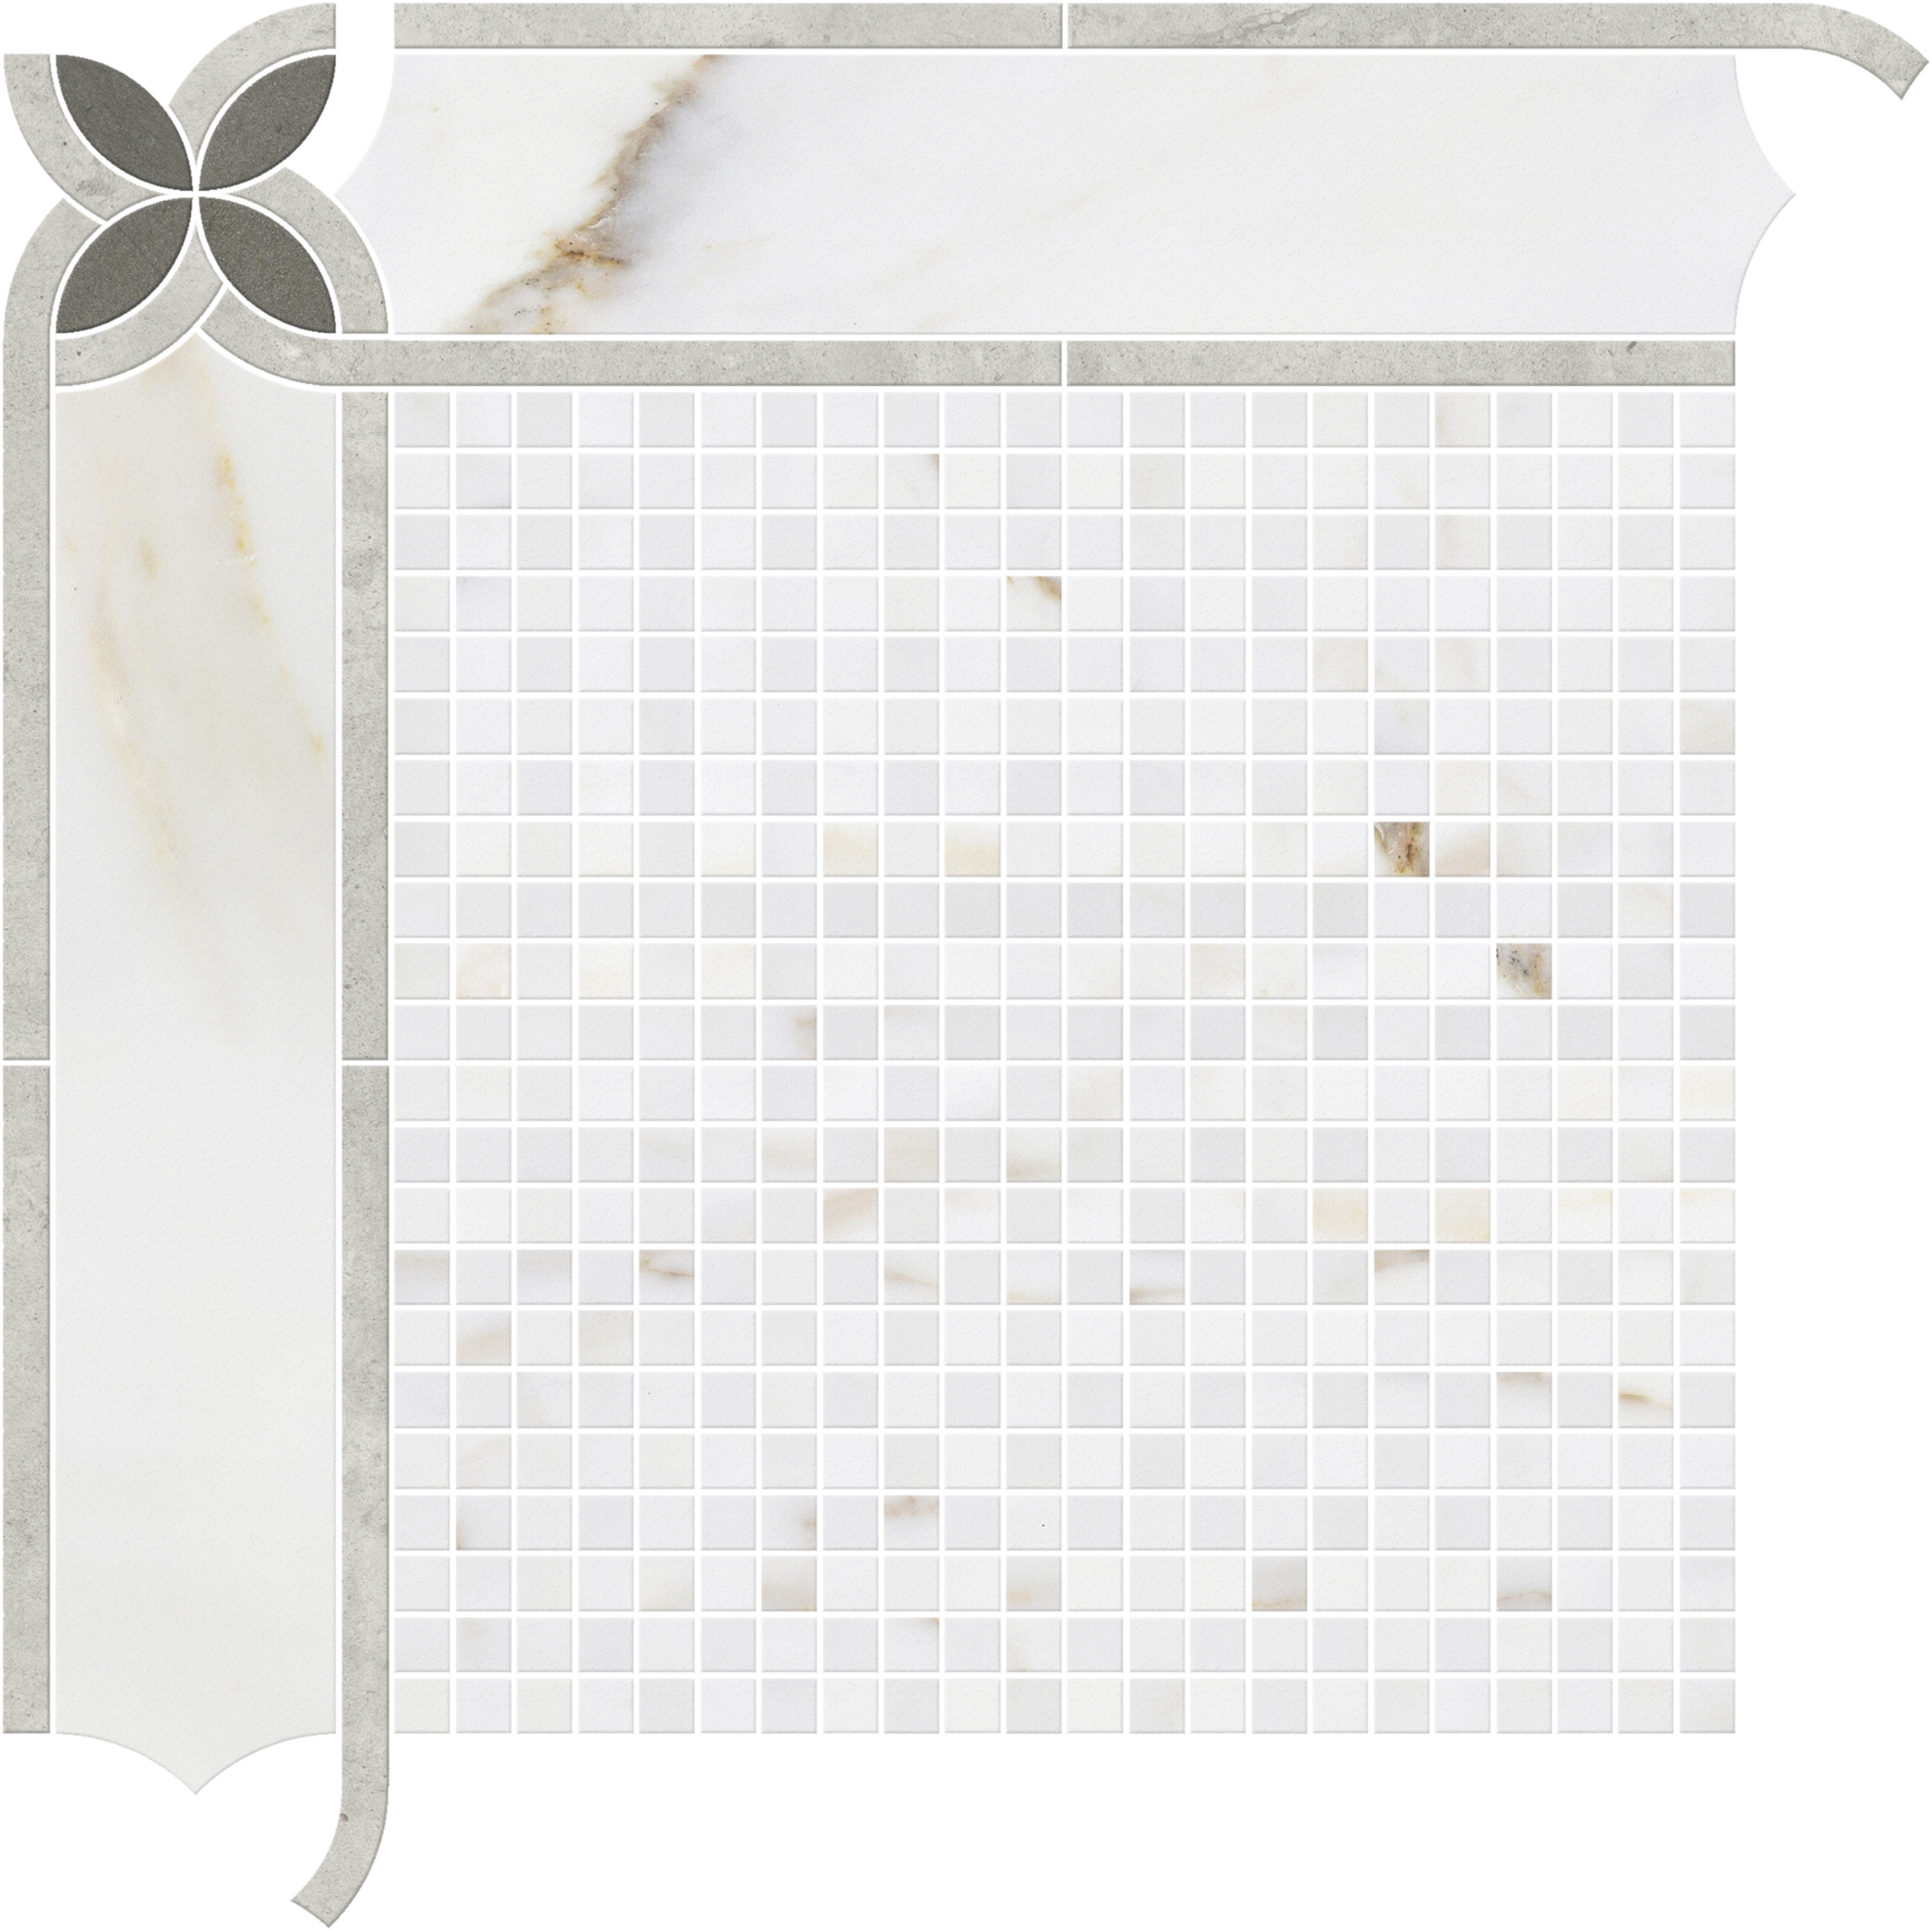 dulcet calmato 1wcalclg natural stone mosaic product sheet made by dulcet and sold by surface group international